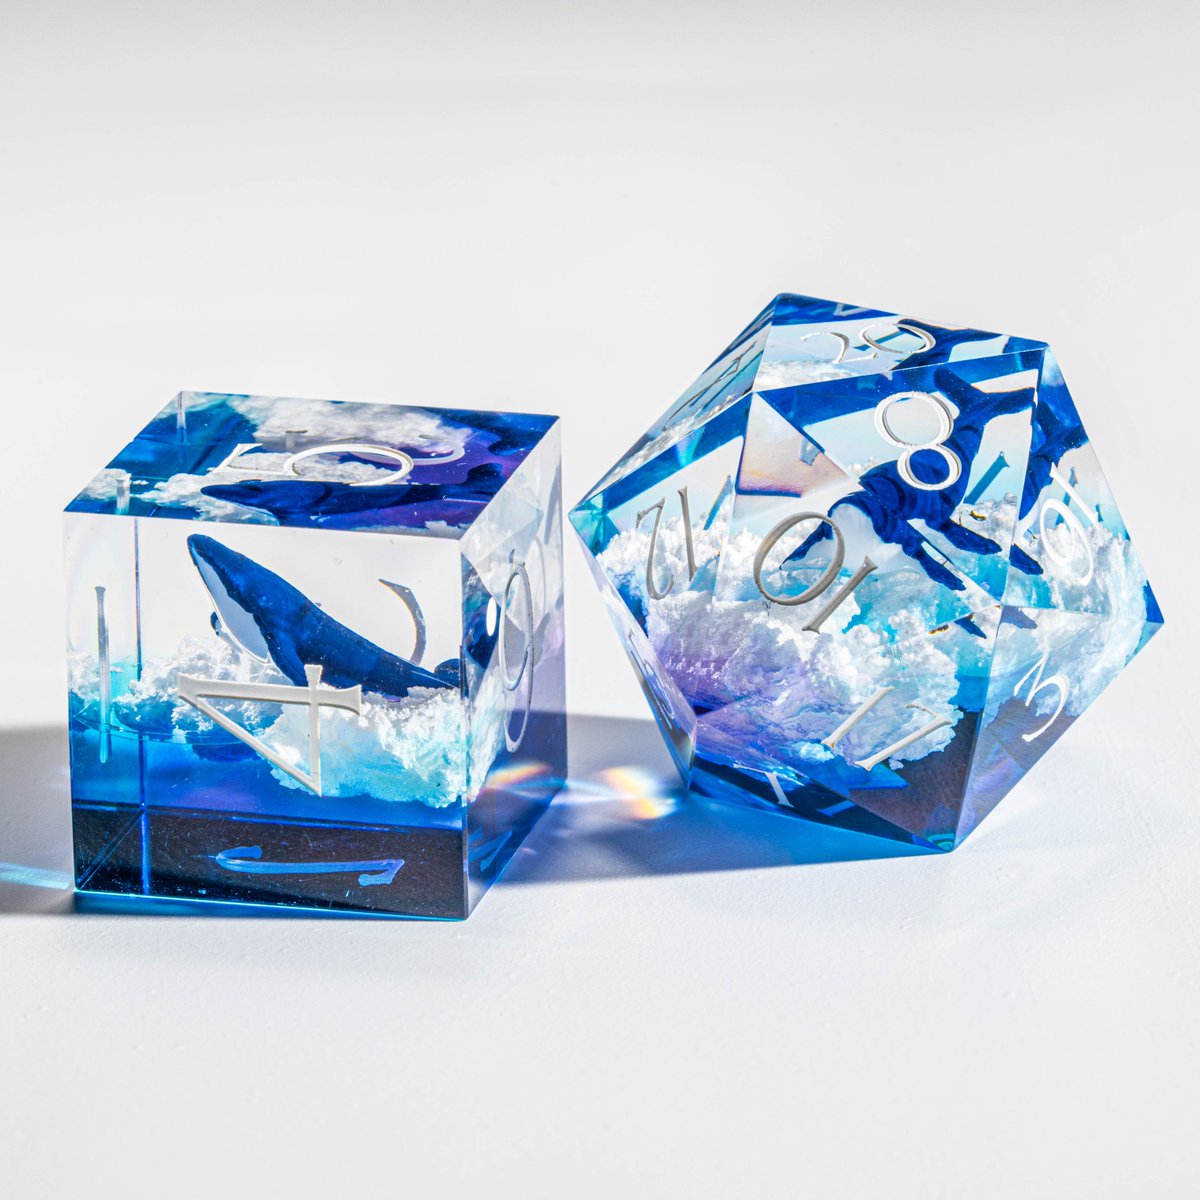 Today, we're excited to give away our newly arrived Dreamy Whale Dice Set on our website ! 😍 
To win: 
🐳Like this post 
🐋Repost using #urwizards
🐳Answer this question: Which whale design do you like more? The Light Blue or the Afterglow (Inspired by the deep blue of the ocean